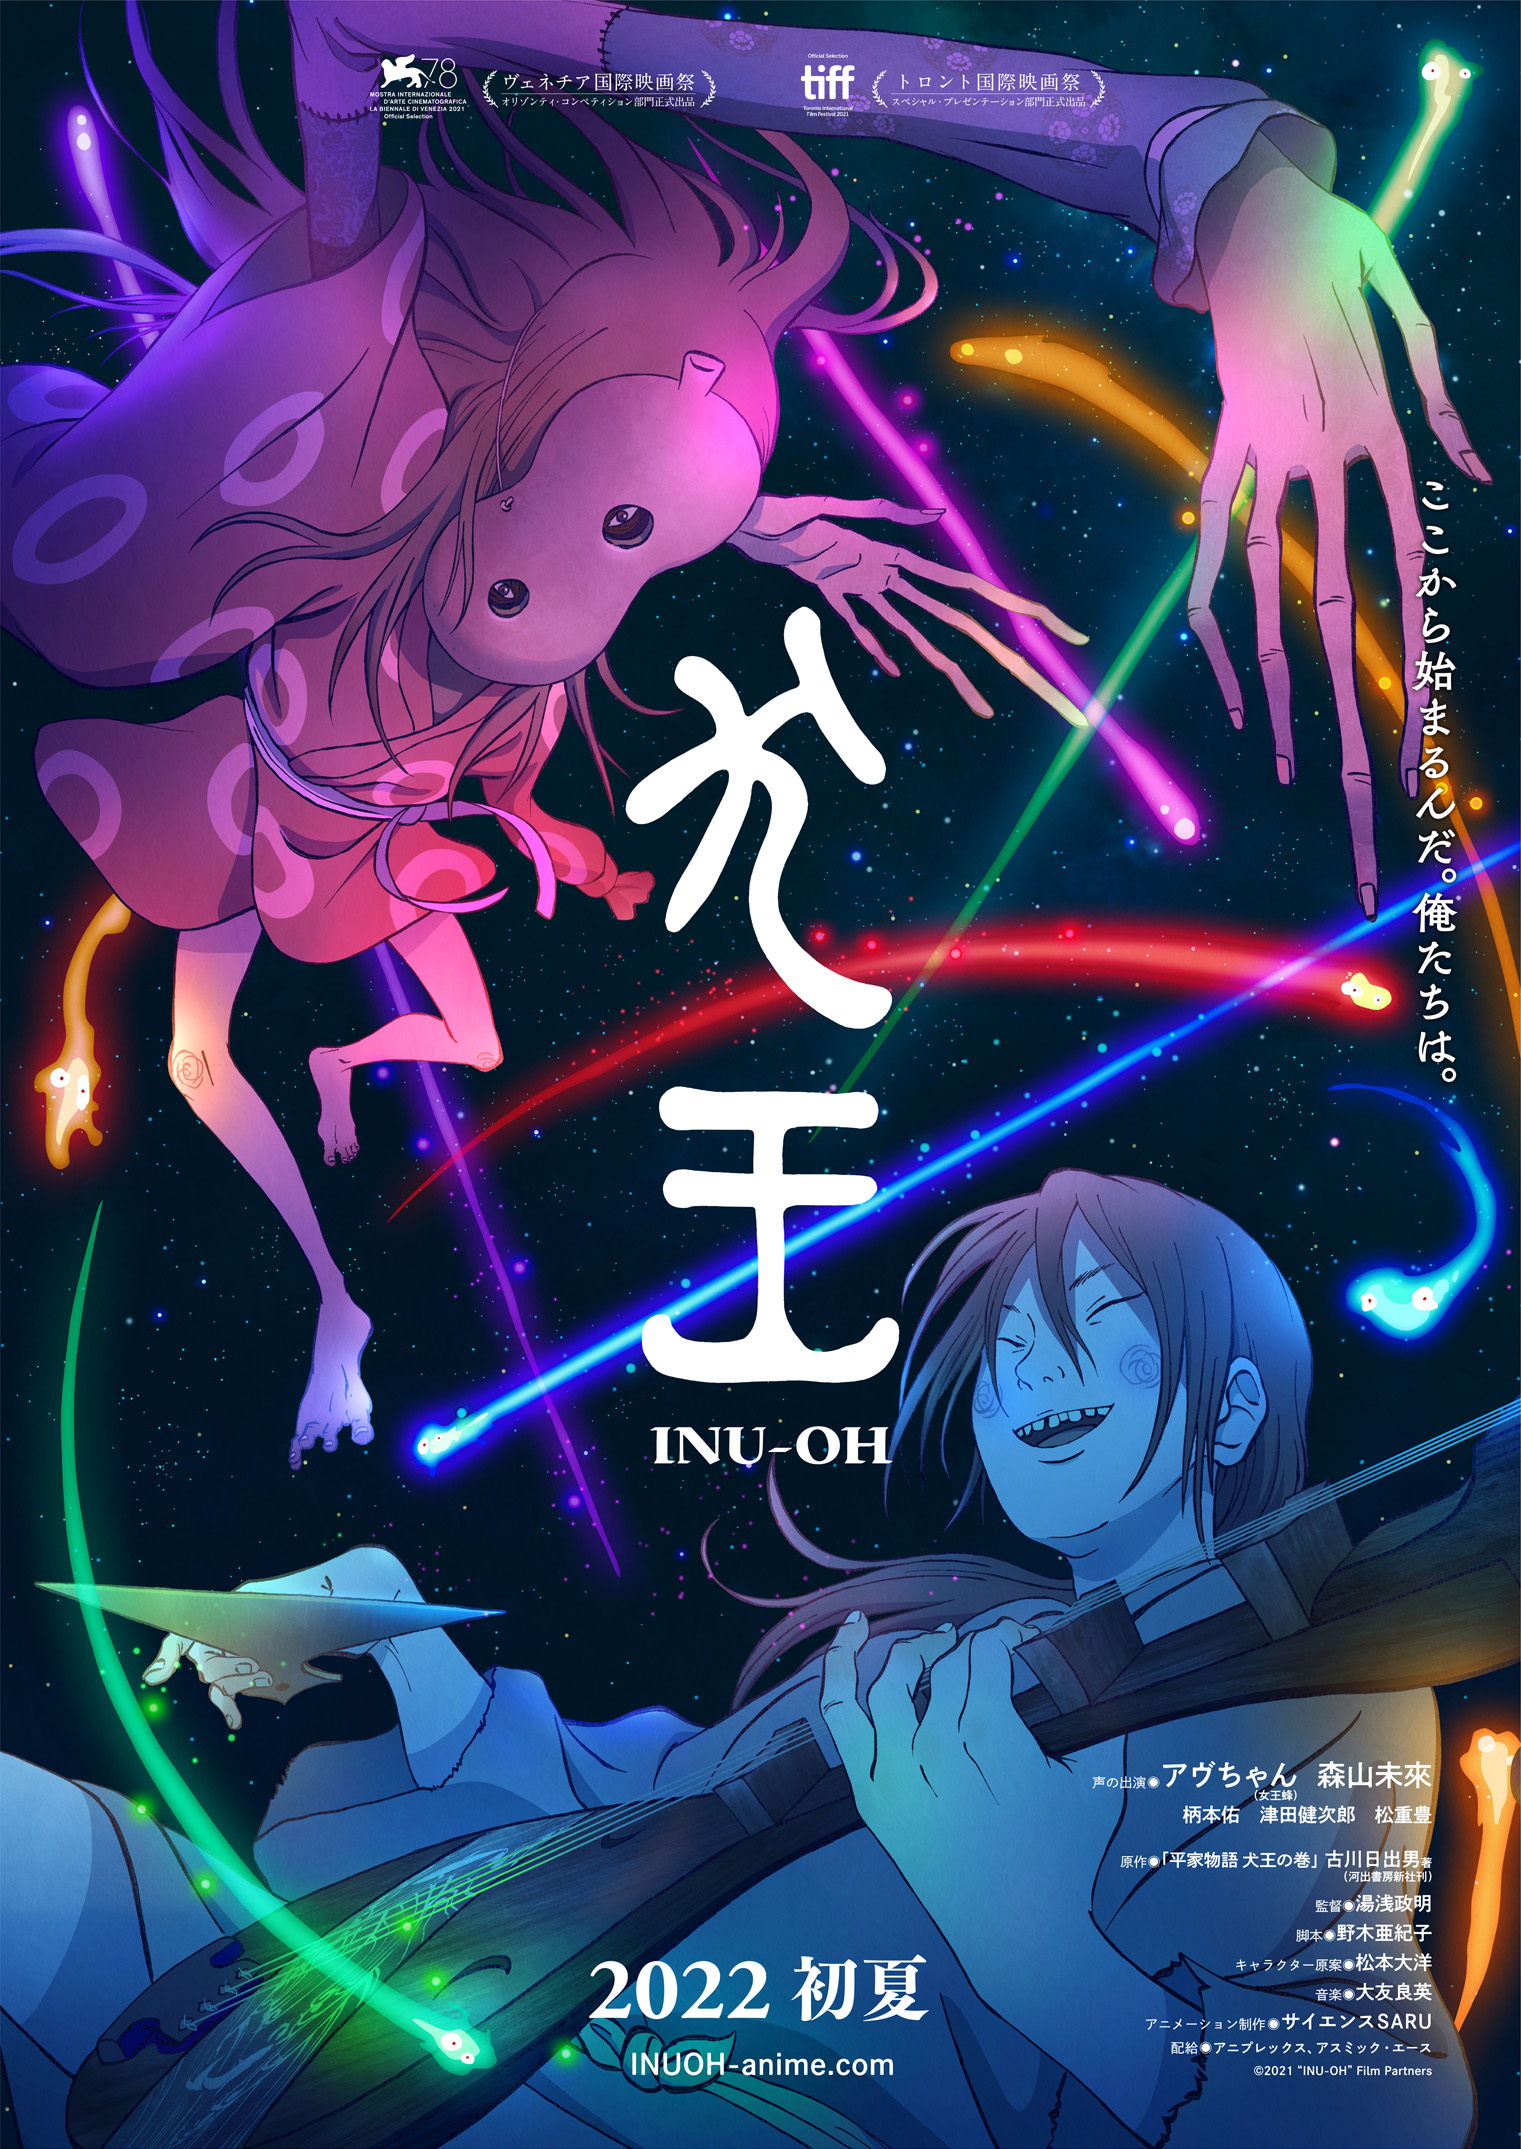 inu-oh-kv Watch New Promo Video for Director Masaaki Yuasa's Film "Inu-Oh"! Out Summer 2022